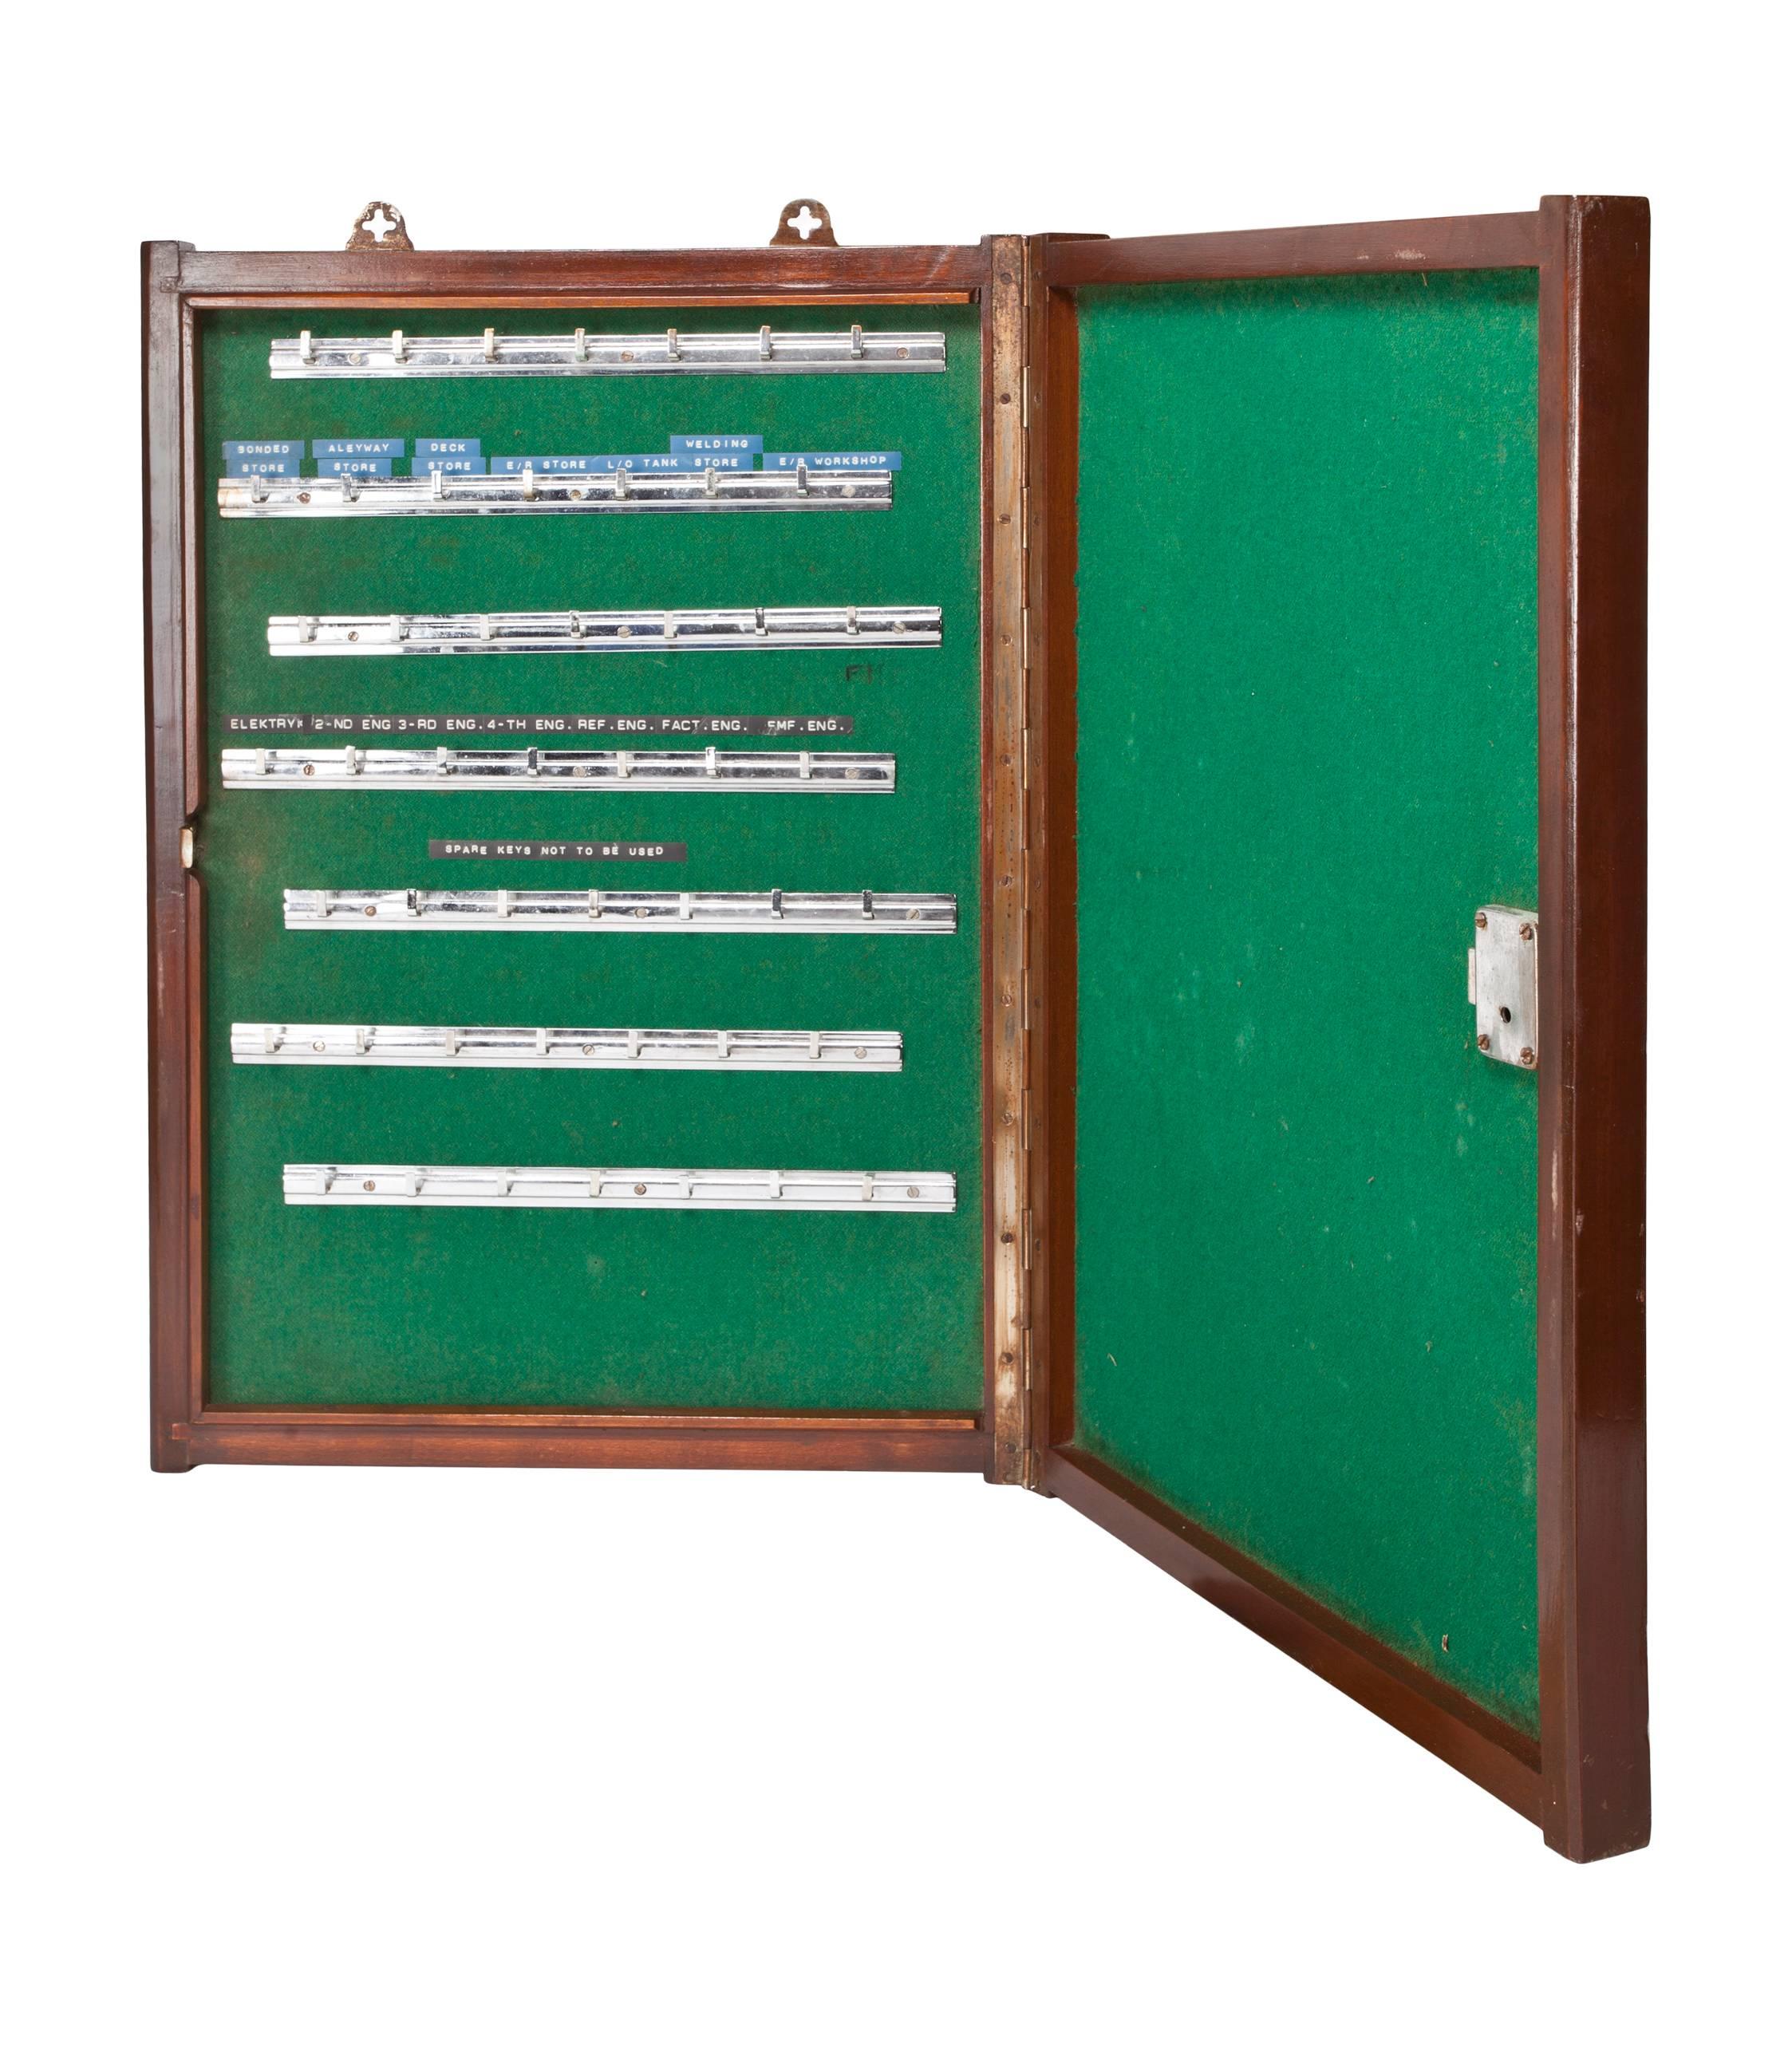 A teak key storage cabinet lined with green felt and chrome hooks. The front door closes and locks. From a decommissioned ship, circa 1970s. A rare find. Complete with lock and key and mounting brackets and the original embossed key labels.